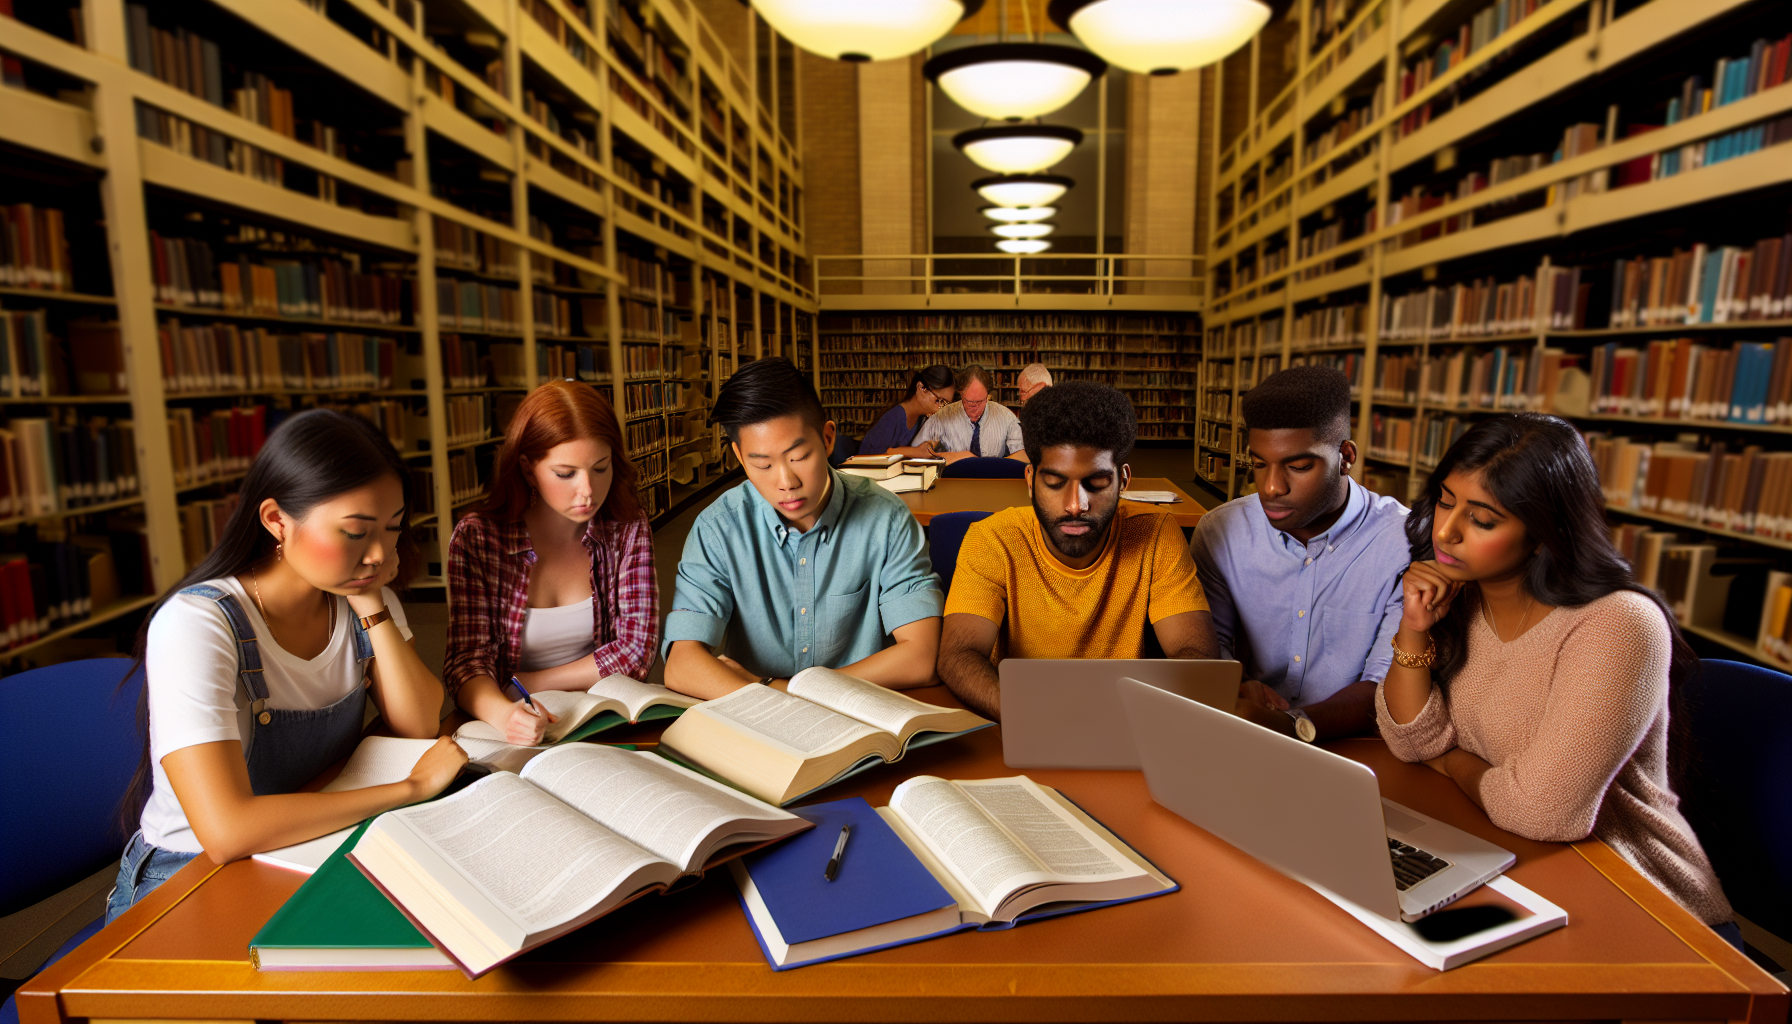 A group of students studying in a university library